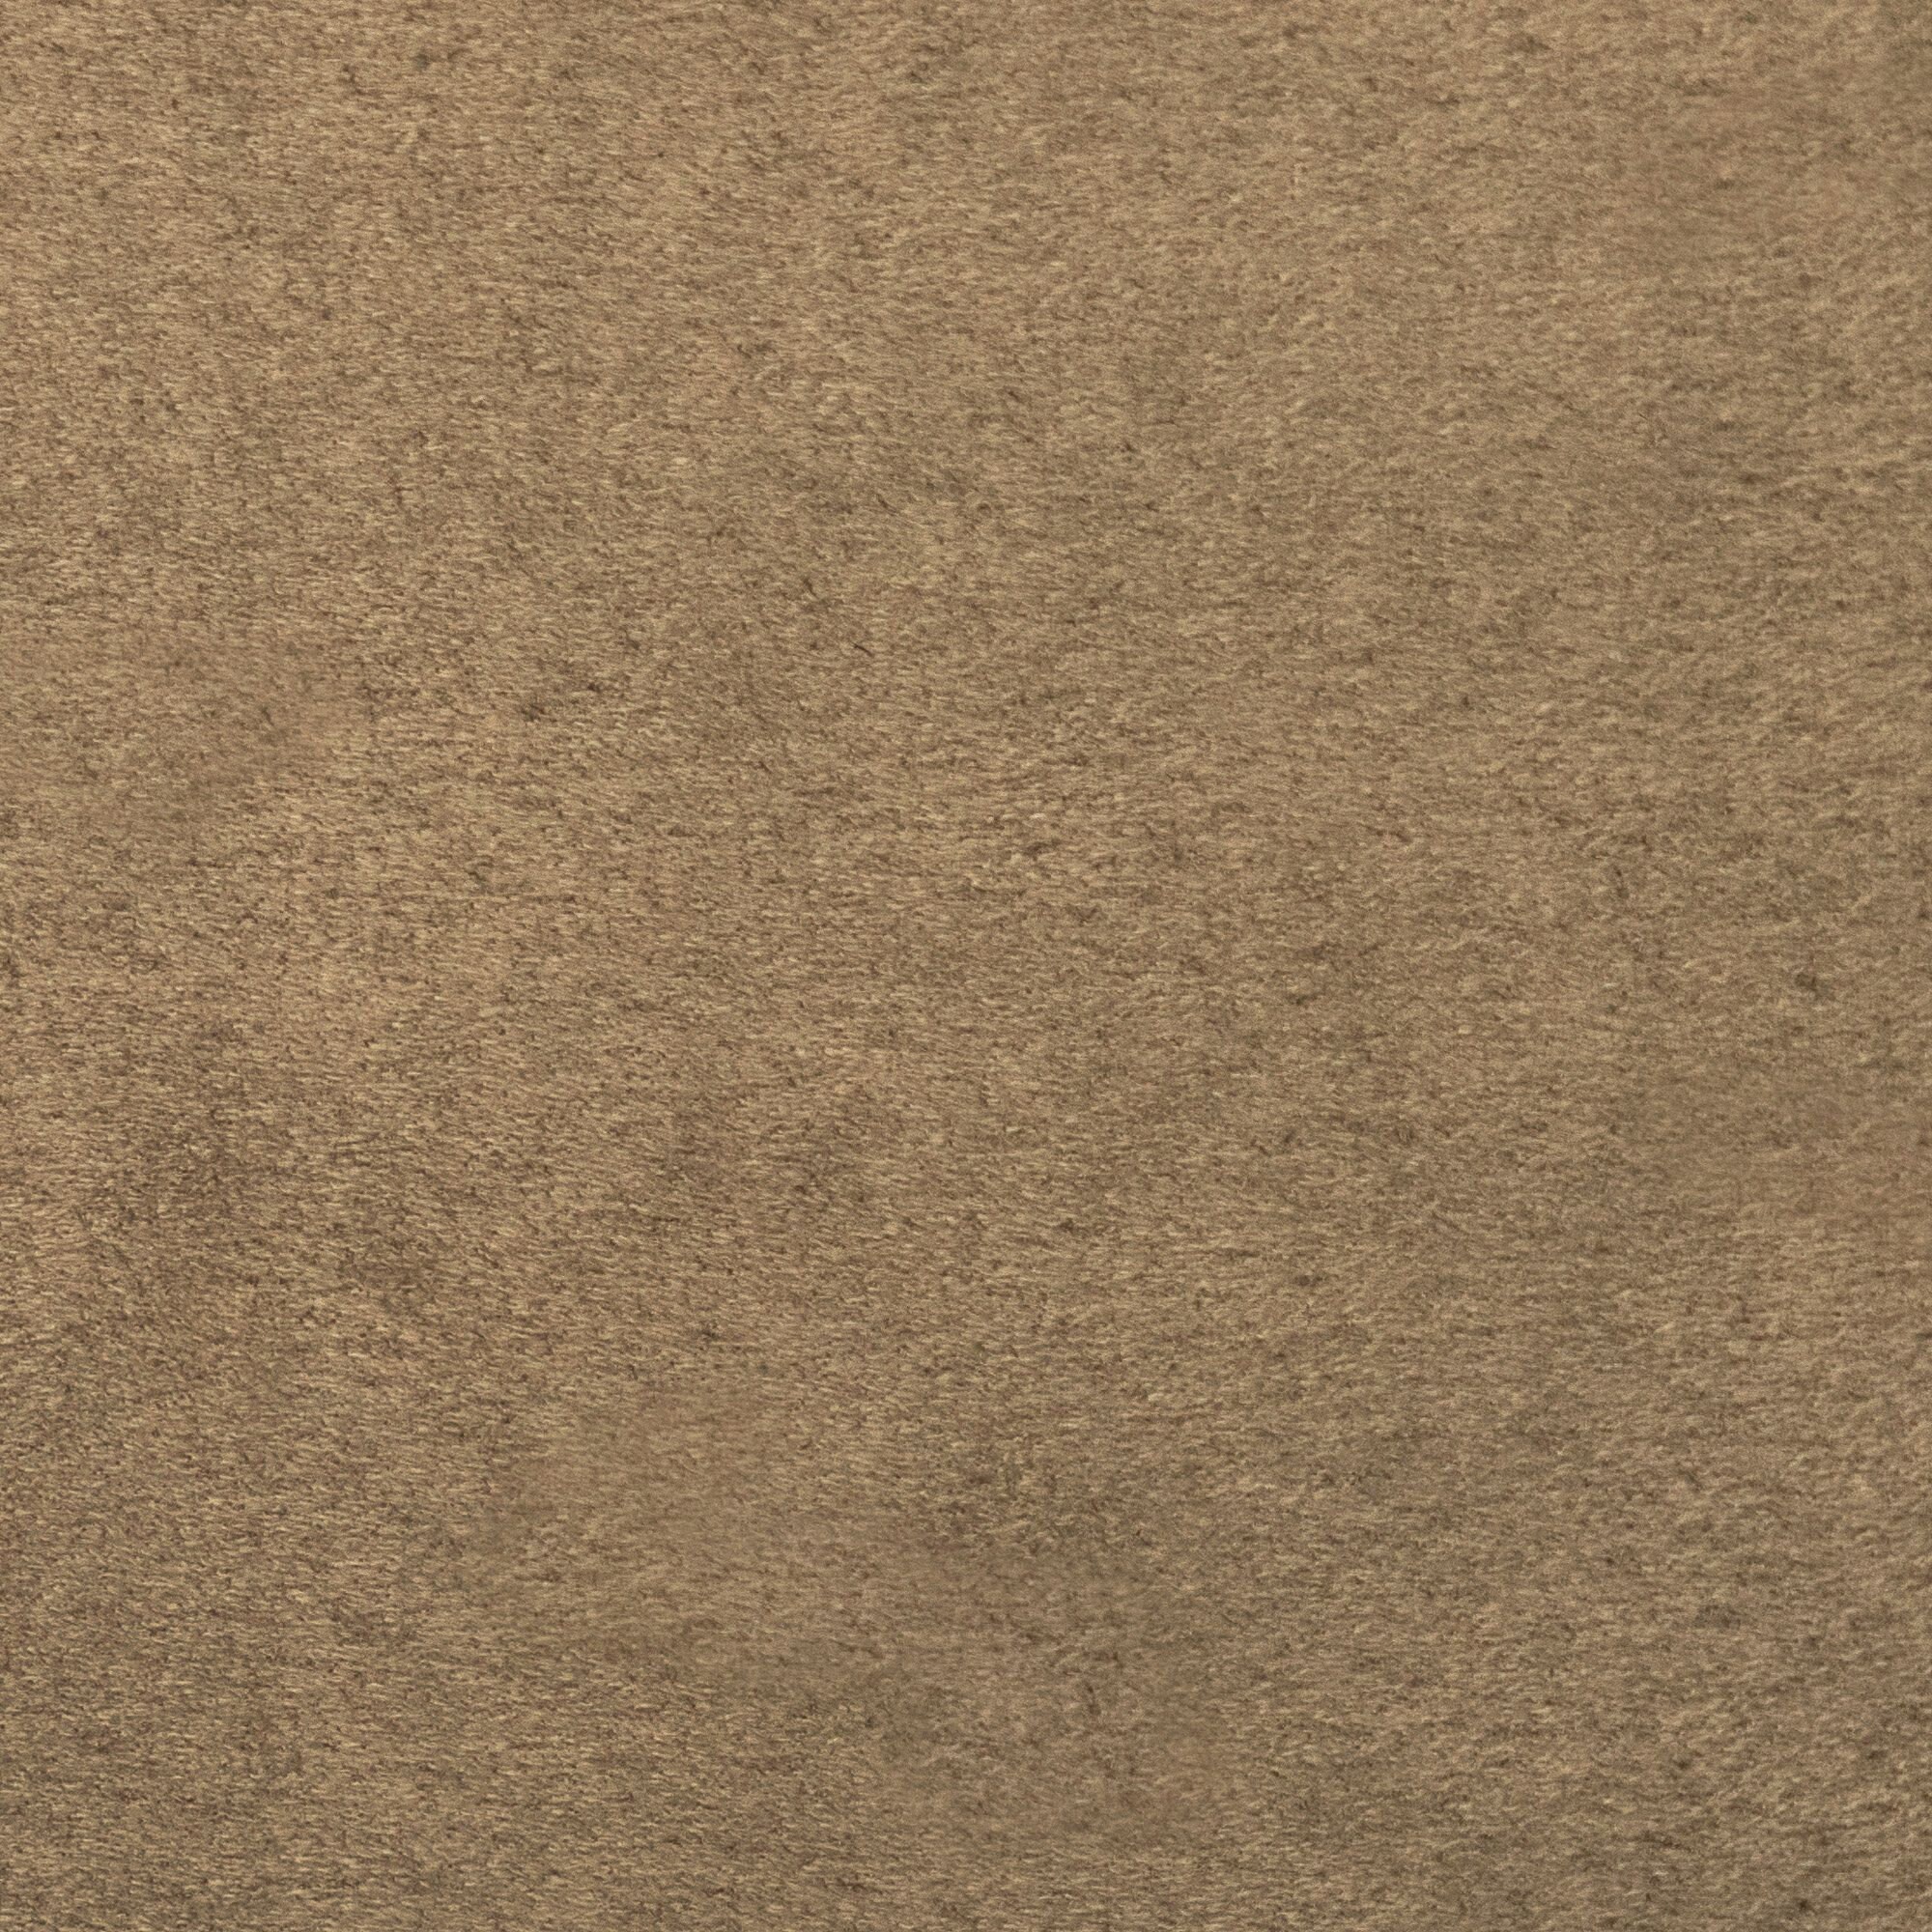 Global - Light Suede, Microsuede Fabric by the Yard - Available in 30